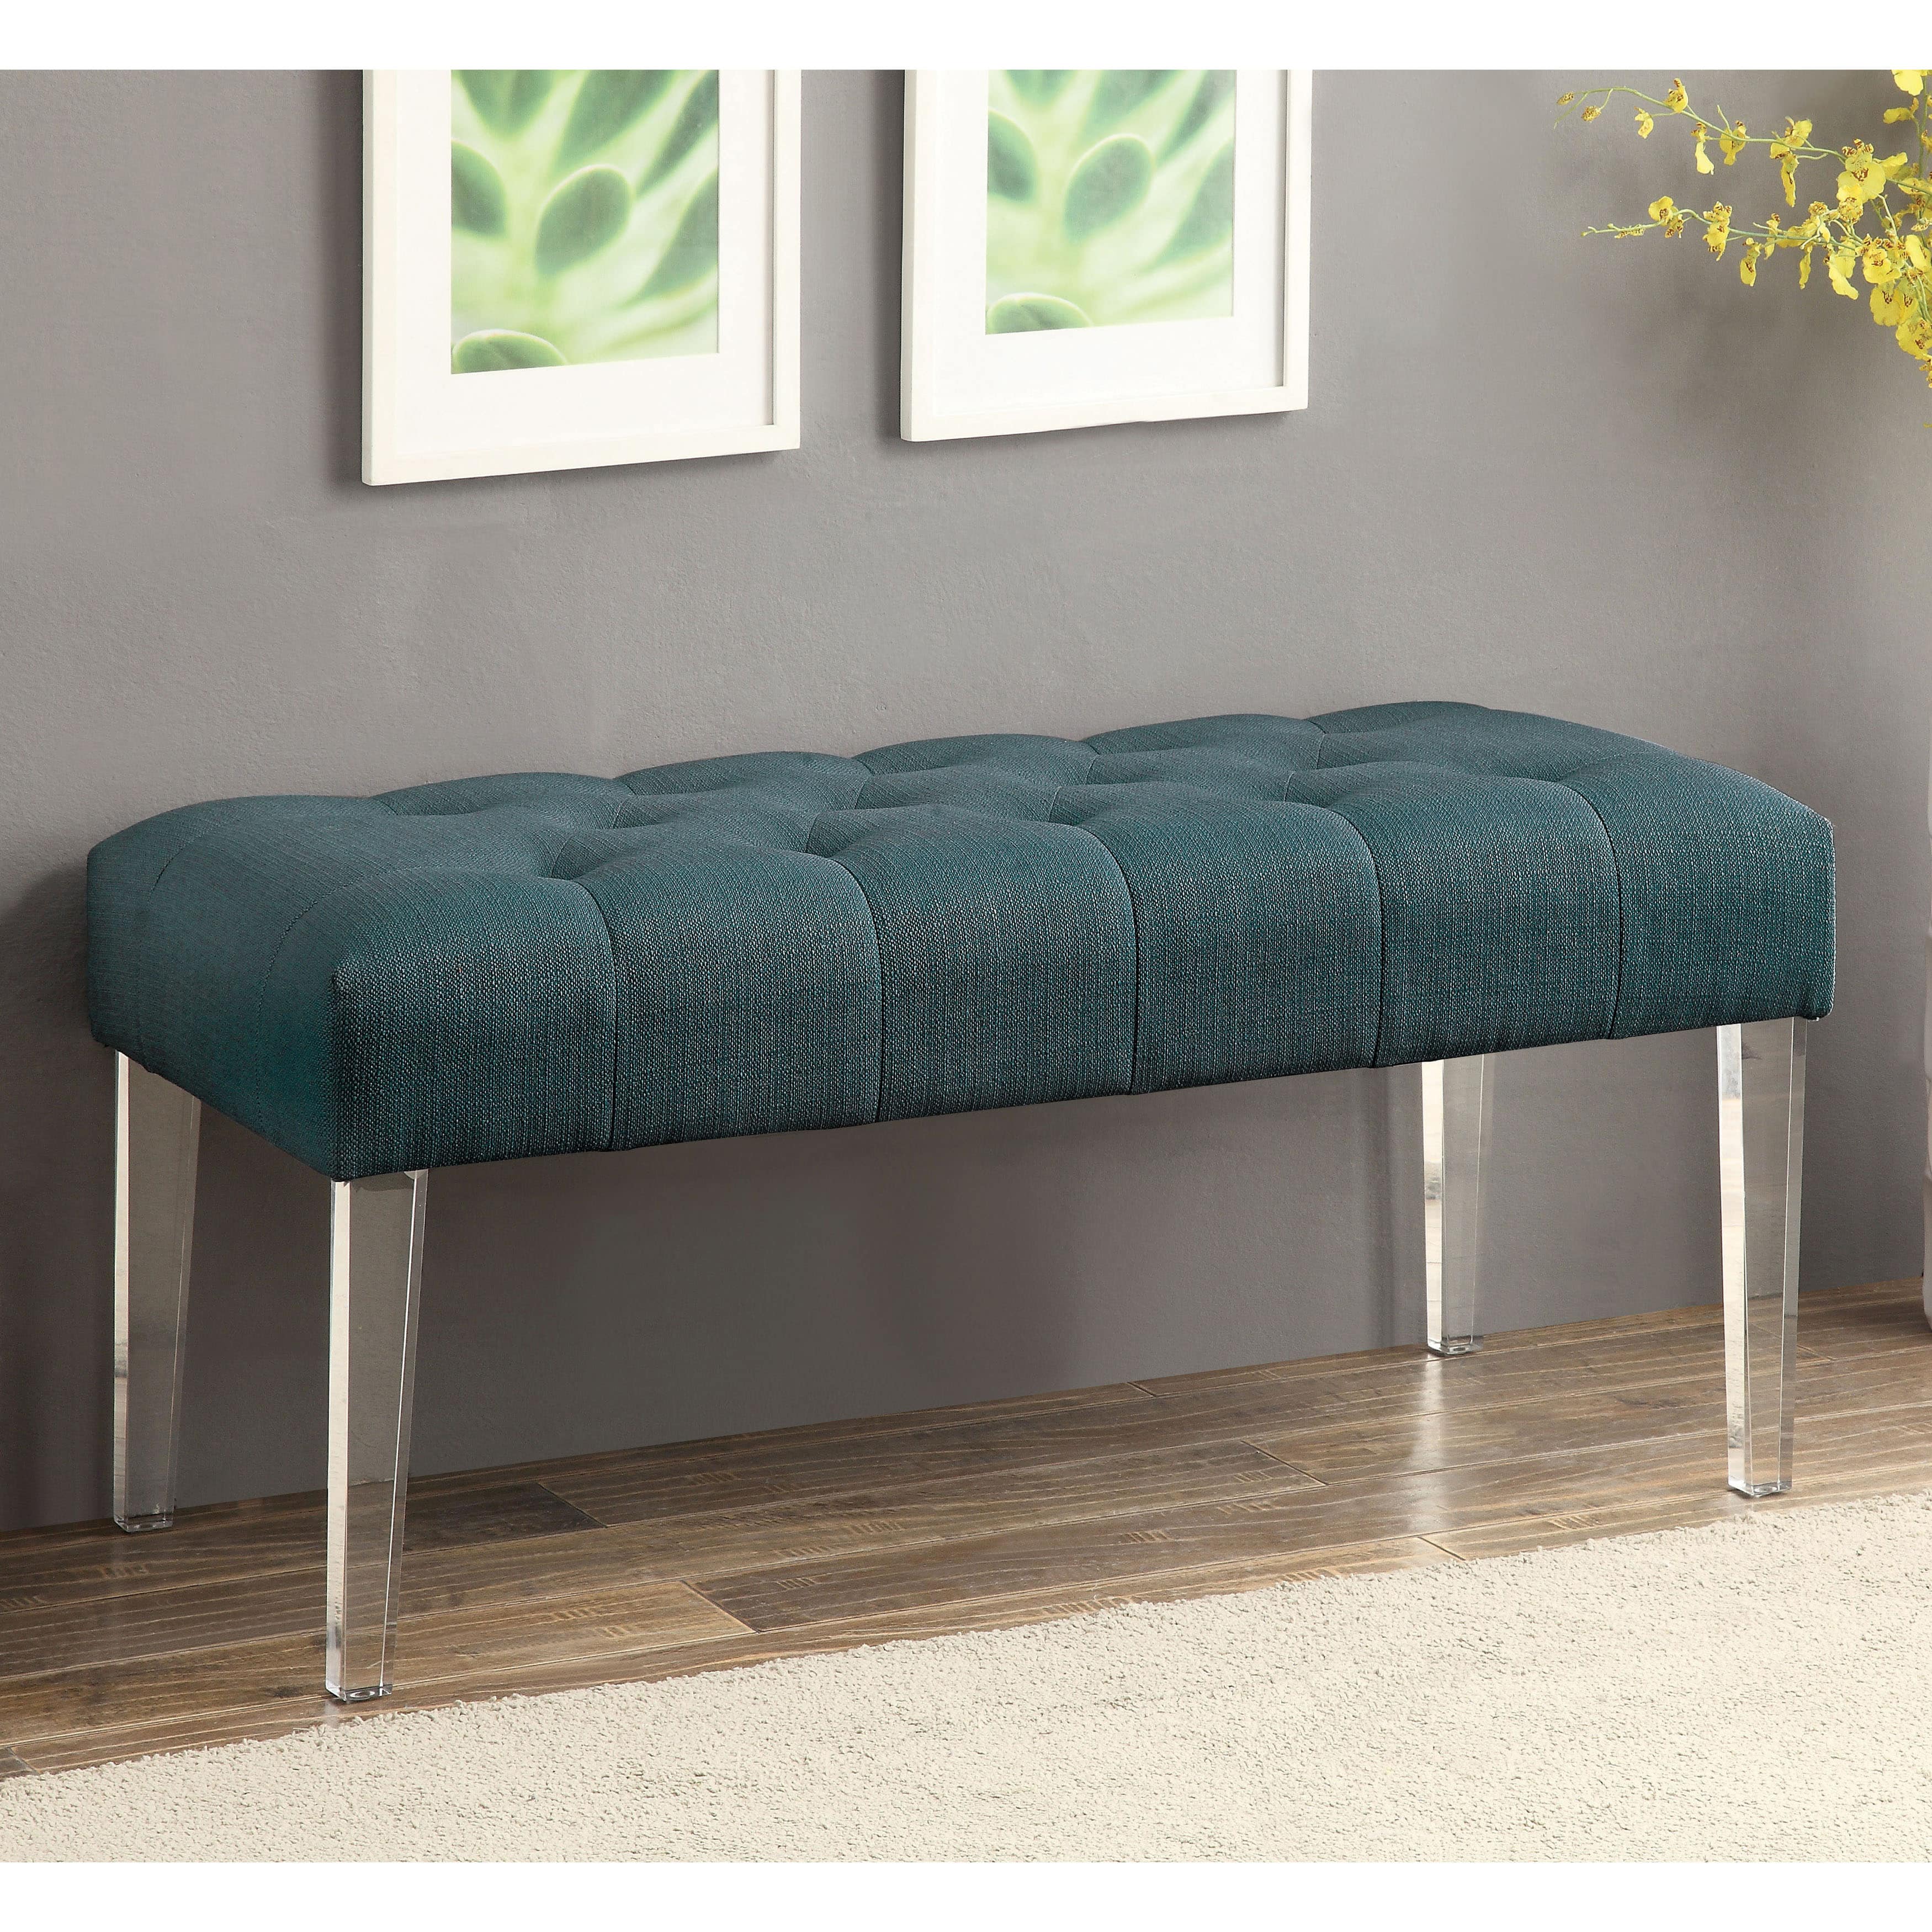 Teal bench with acrylic legs